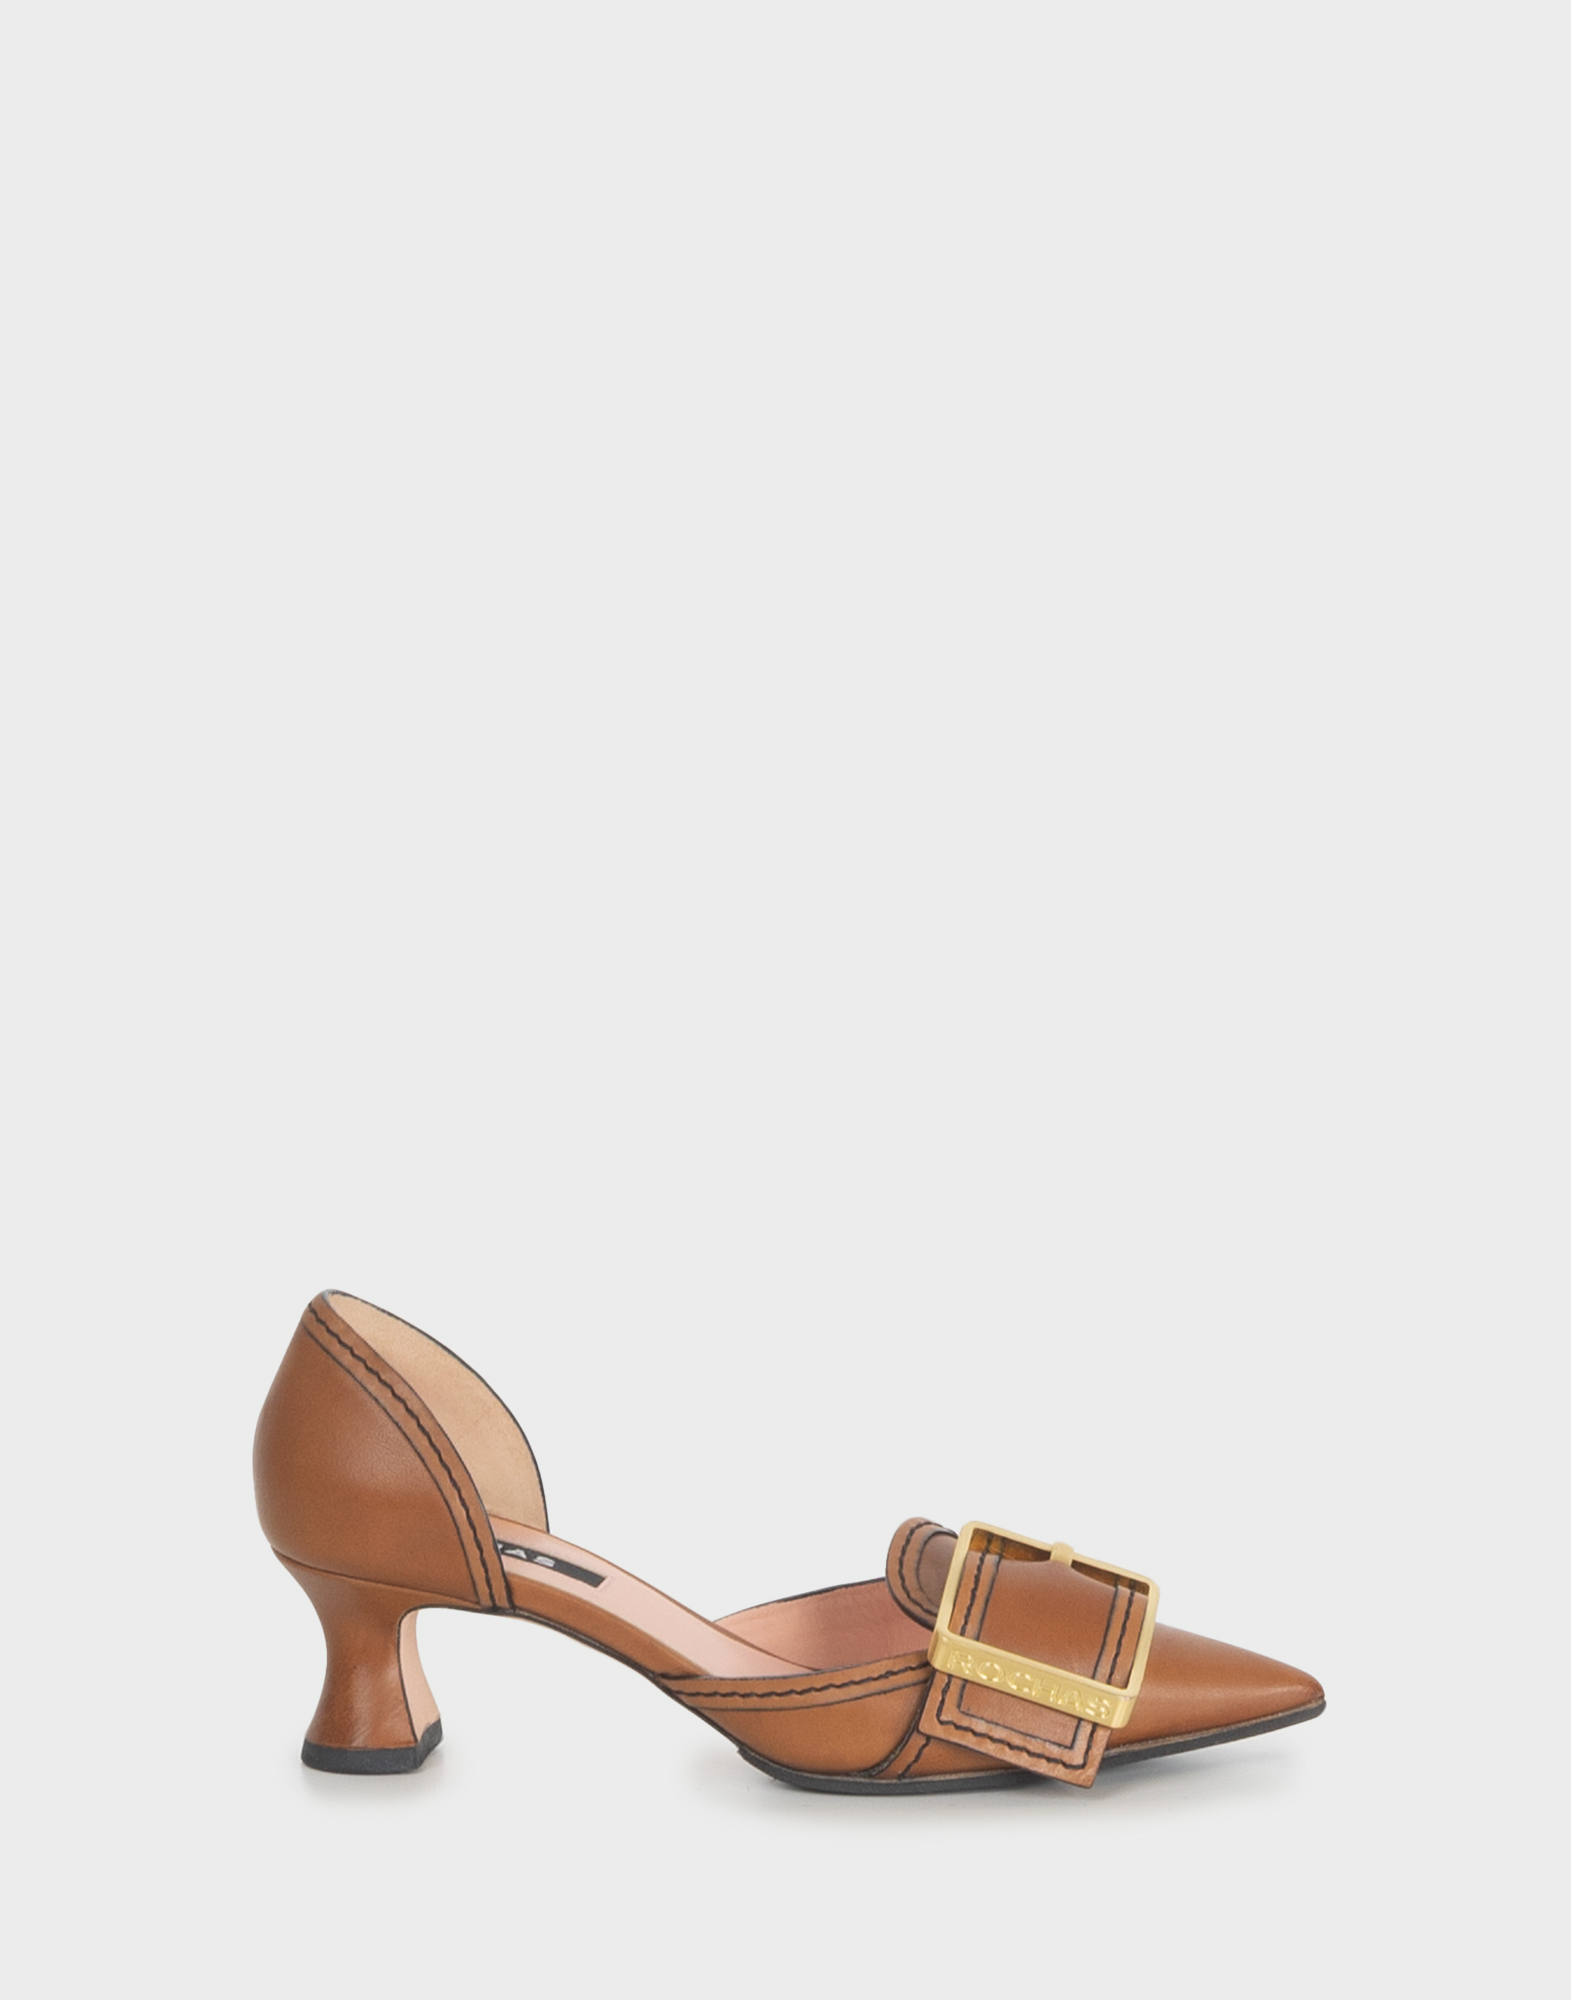 brown leather low heel shoes with toe cap, gold buckle on instep, contrasting black stitching